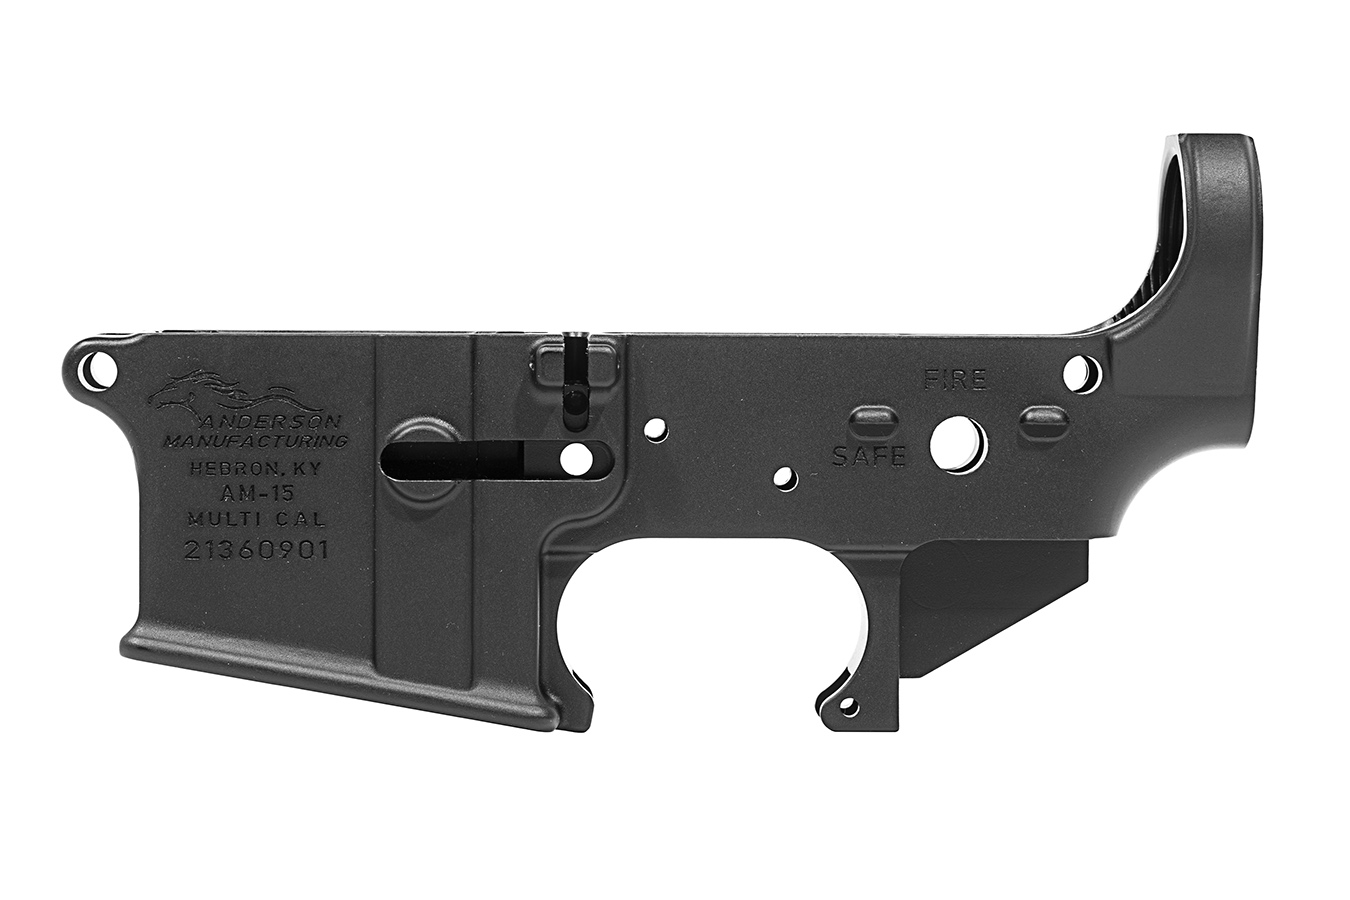 No. 10 Best Selling: ANDERSON MANUFACTURING AM-15 STRIPPED LOWER RECEIVER (MULTI CAL)